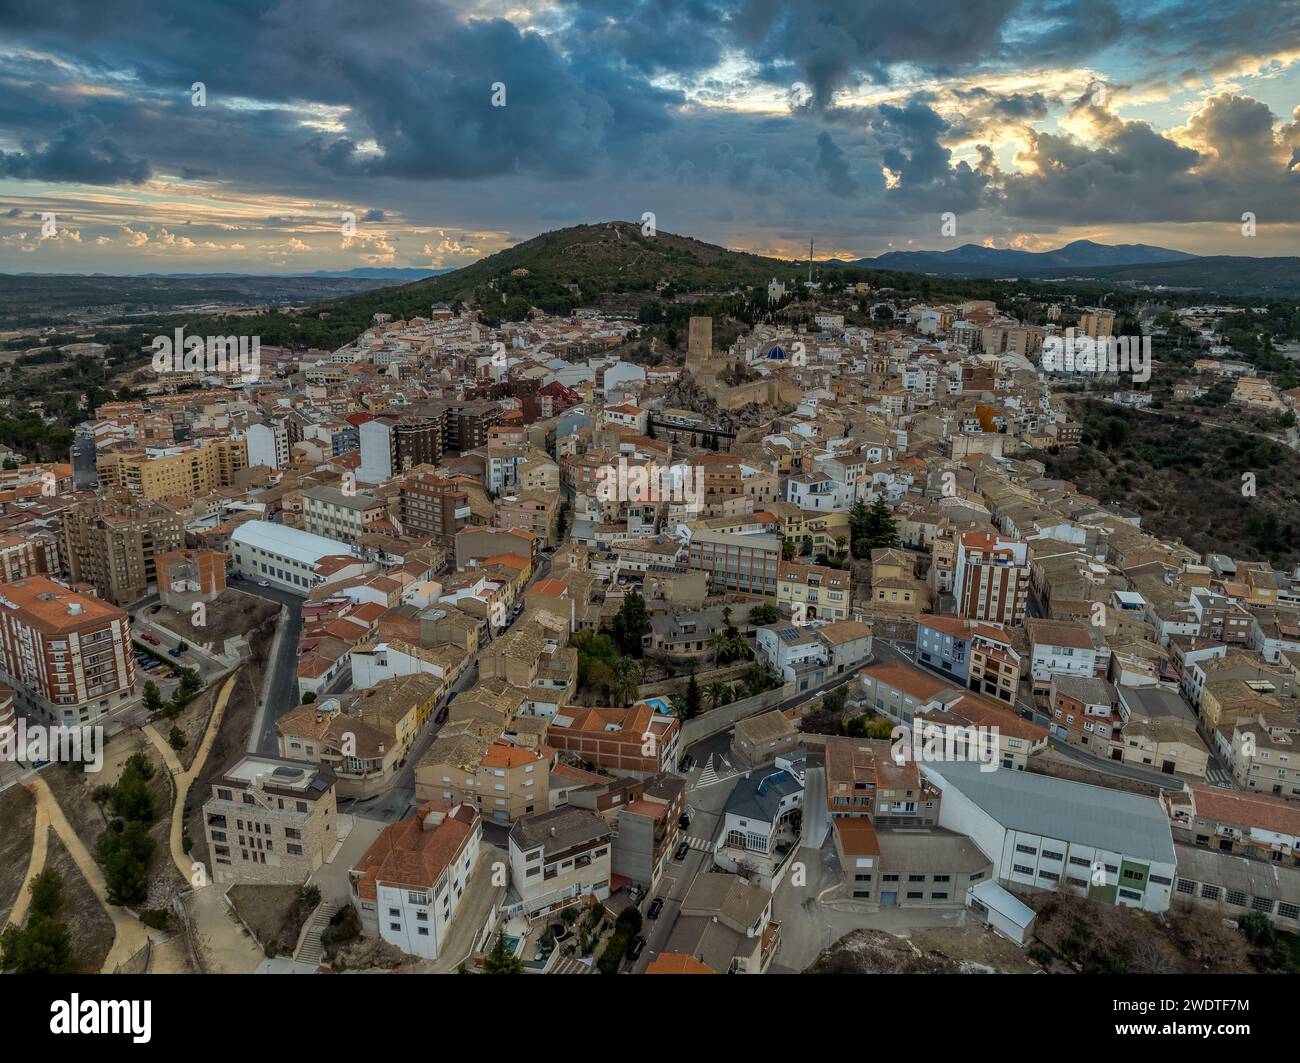 Aerial view of Banyeres town and castle with dramatic sky in Spain Stock Photo